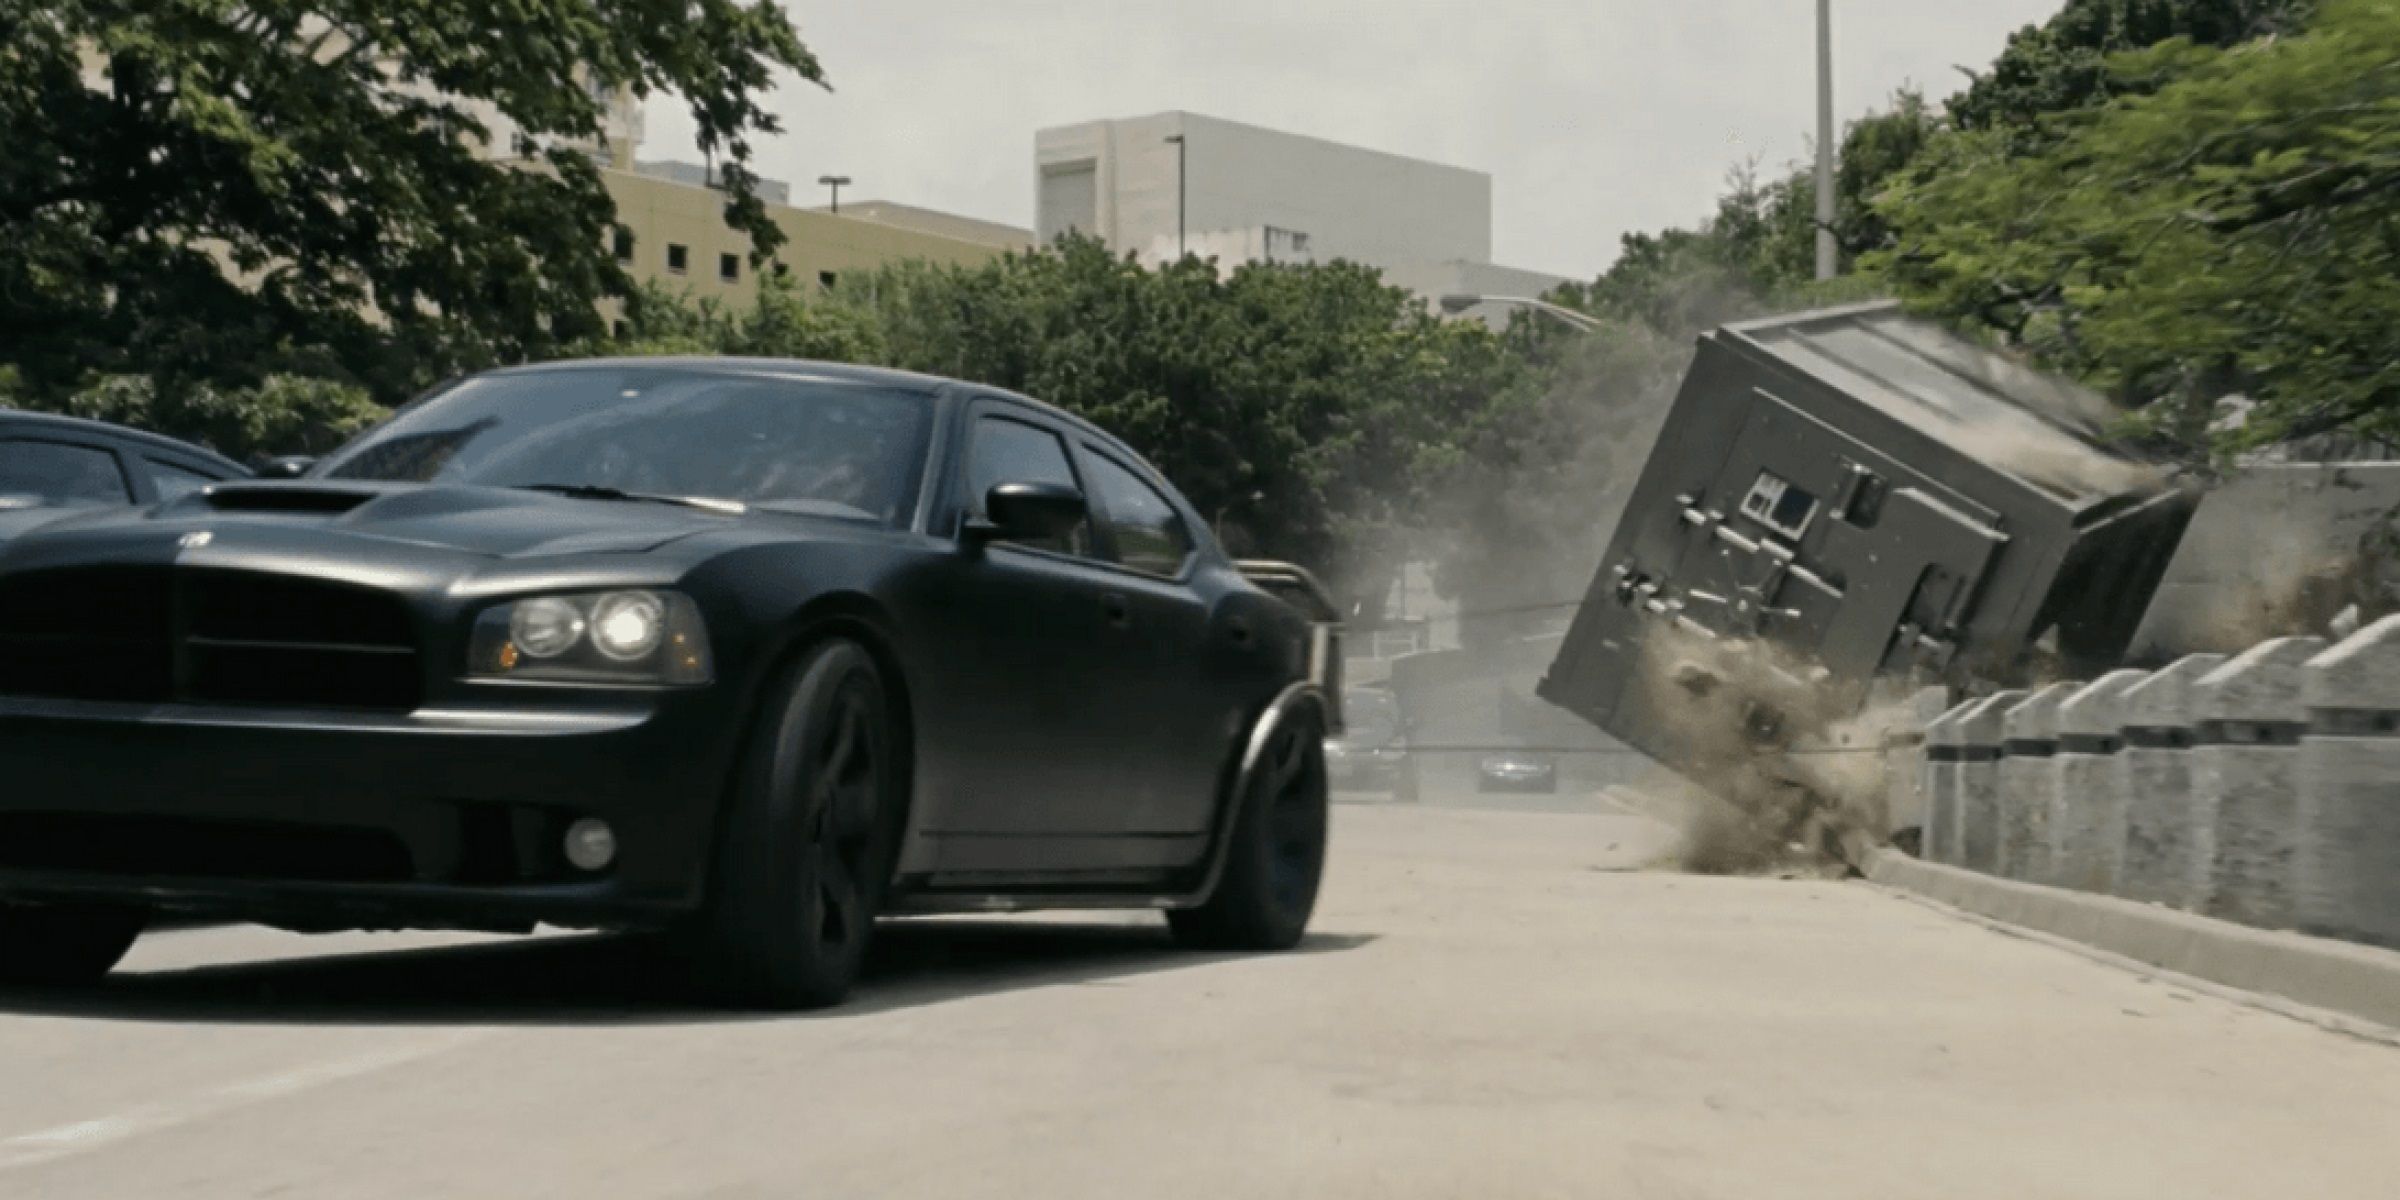 The heist in Fast Five